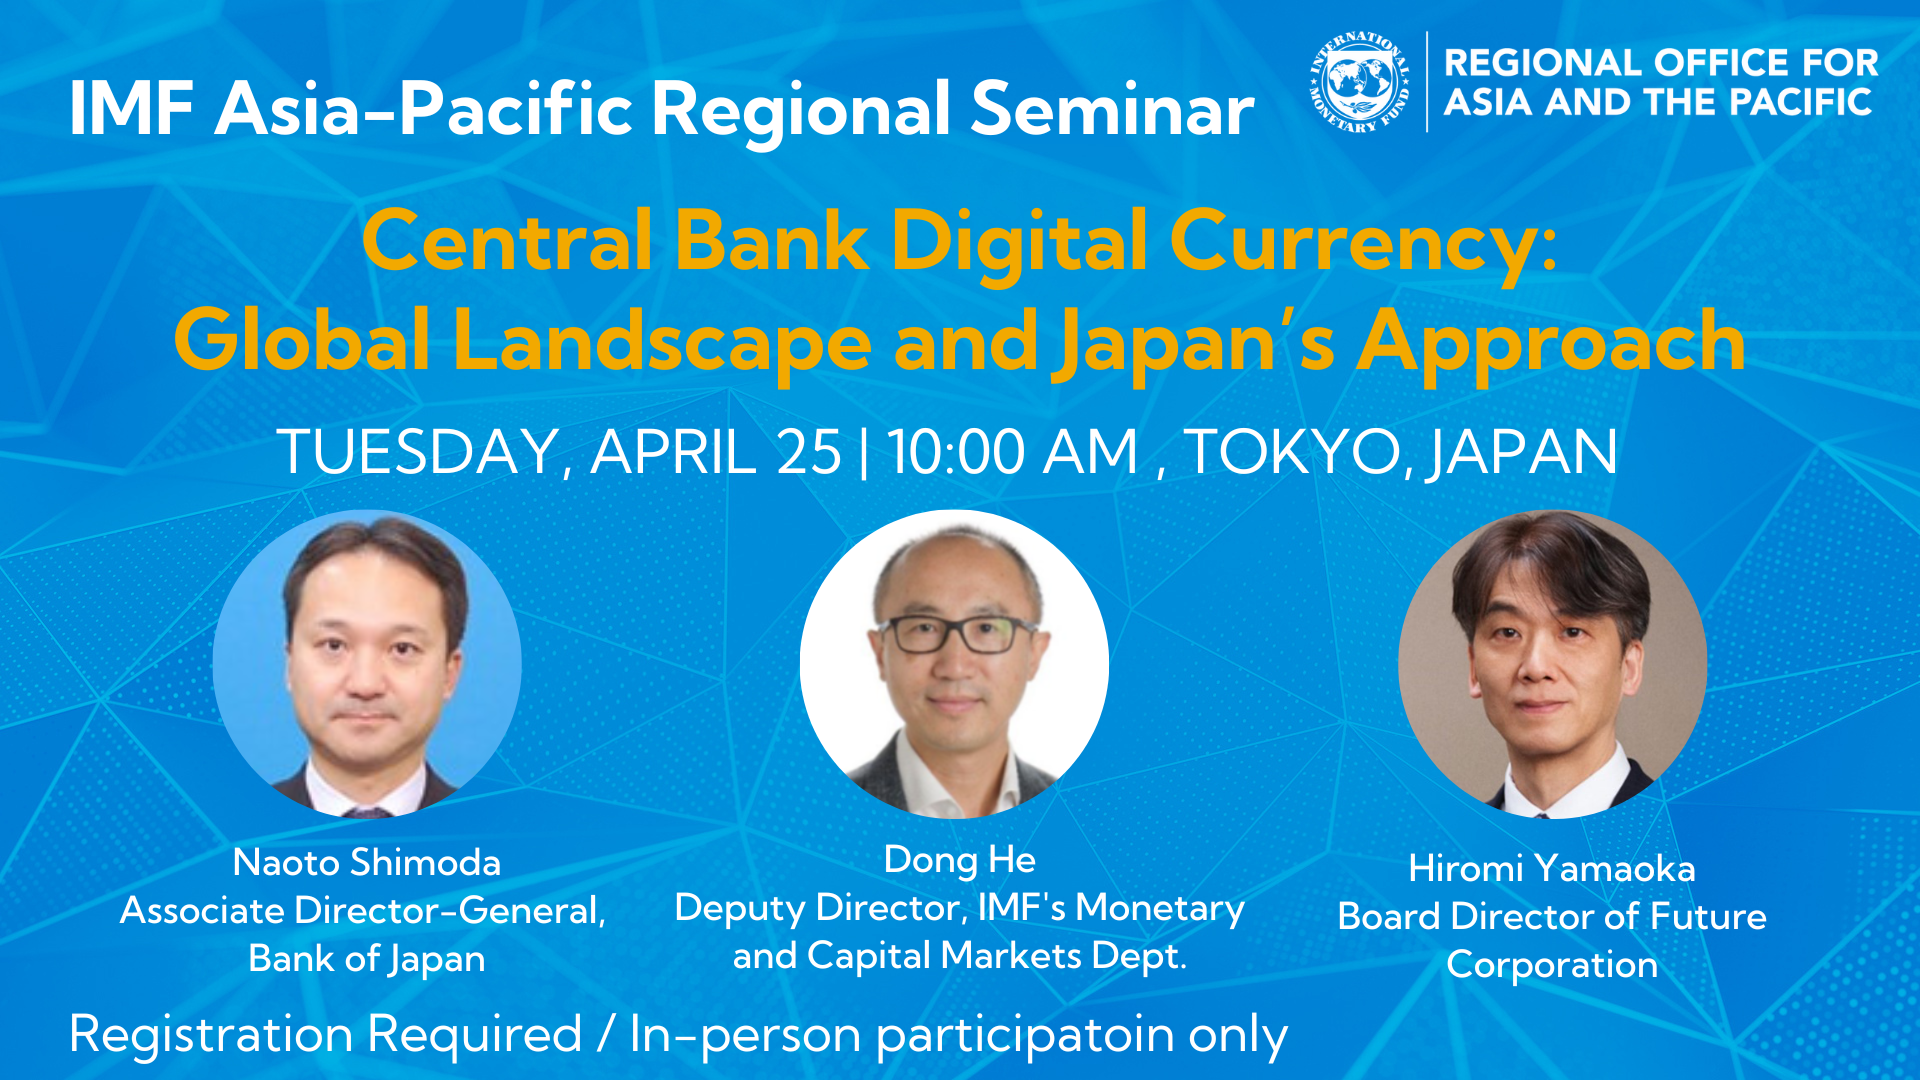 IMF Asia-Pacific Regional Seminar on Central Bank Digital Currency: Global Landscape and Japan's Approach